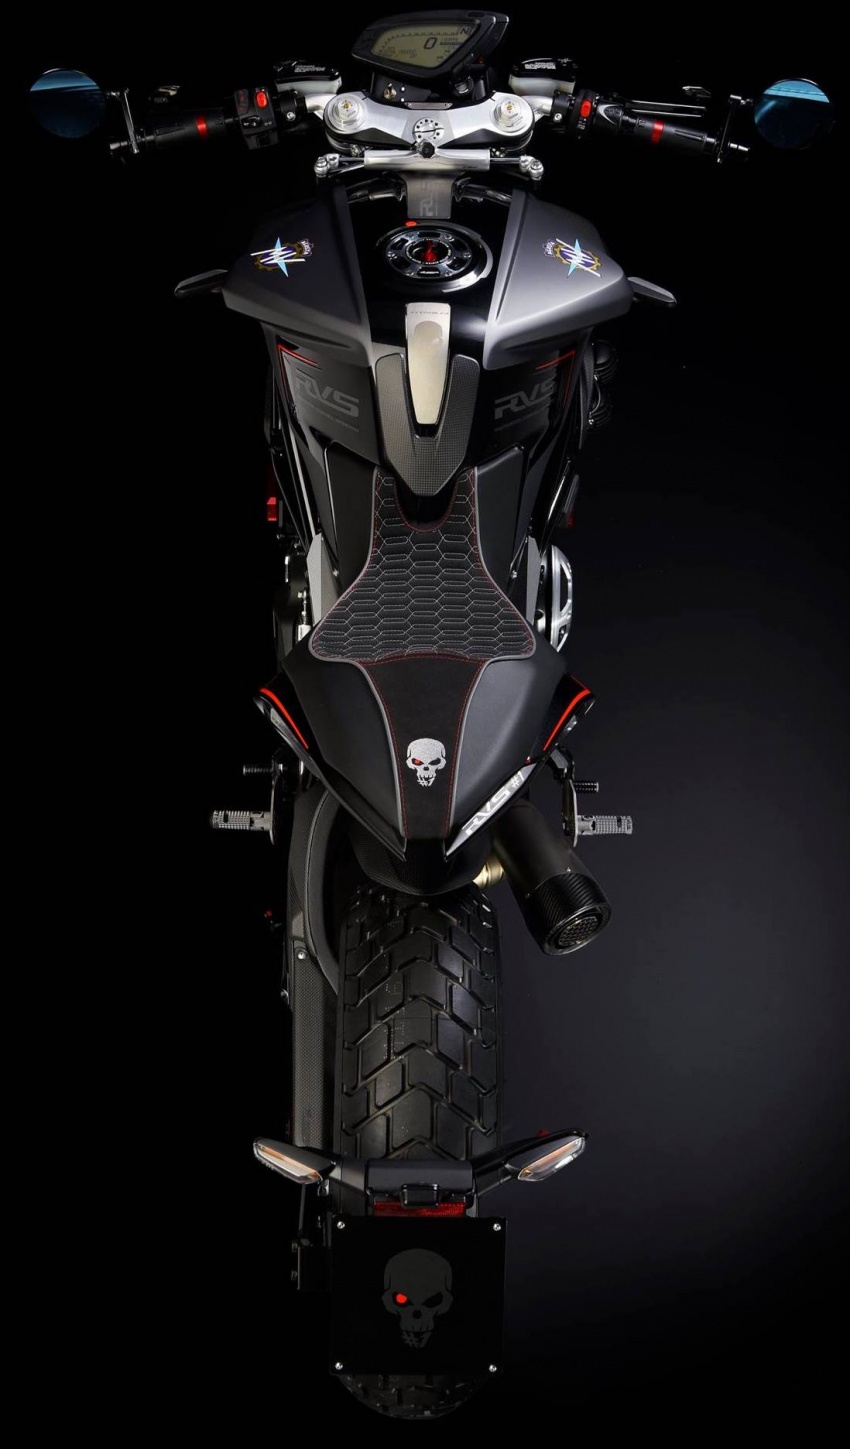 2017 MV Agusta RVS #1 unveiled – bespoke, hand-built and very expensive, probably 672473